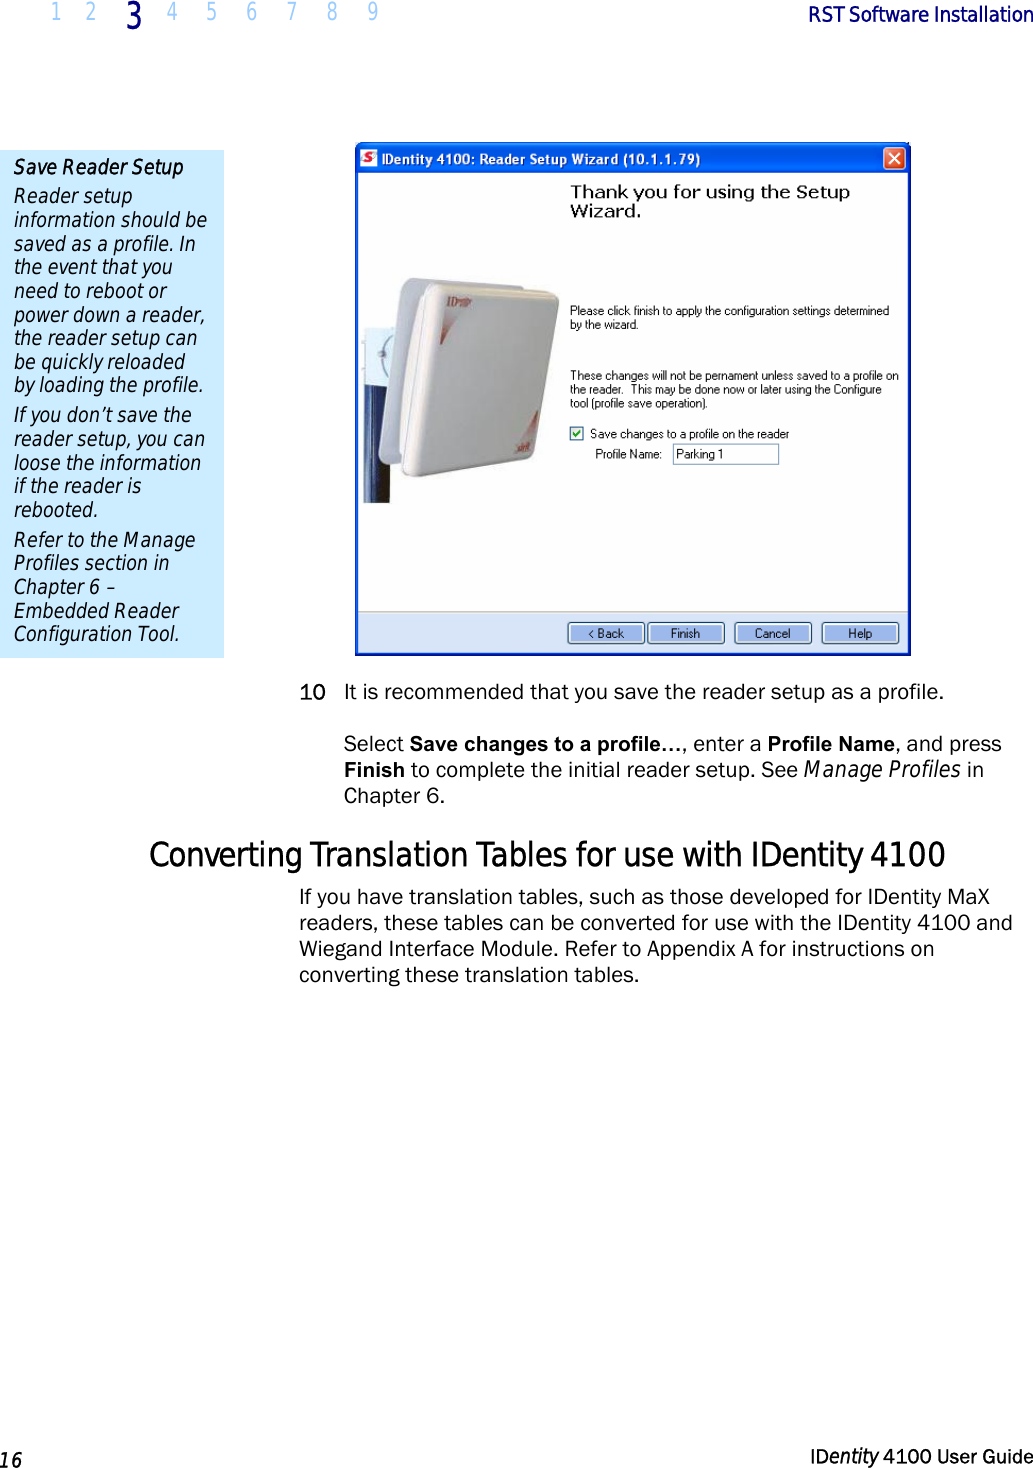  1 2 3 4 5 6 7 8 9       RST Software Installation   16  IDentity 4100 User Guide   10 It is recommended that you save the reader setup as a profile.   Select Save changes to a profile…, enter a Profile Name, and press Finish to complete the initial reader setup. See Manage Profiles in Chapter 6. Converting Translation Tables for use with IDentity 4100 If you have translation tables, such as those developed for IDentity MaX readers, these tables can be converted for use with the IDentity 4100 and Wiegand Interface Module. Refer to Appendix A for instructions on converting these translation tables.  Save Reader Setup Reader setup information should be saved as a profile. In the event that you need to reboot or power down a reader, the reader setup can be quickly reloaded by loading the profile. If you don’t save the reader setup, you can loose the information if the reader is rebooted. Refer to the Manage Profiles section in Chapter 6 – Embedded Reader Configuration Tool. 